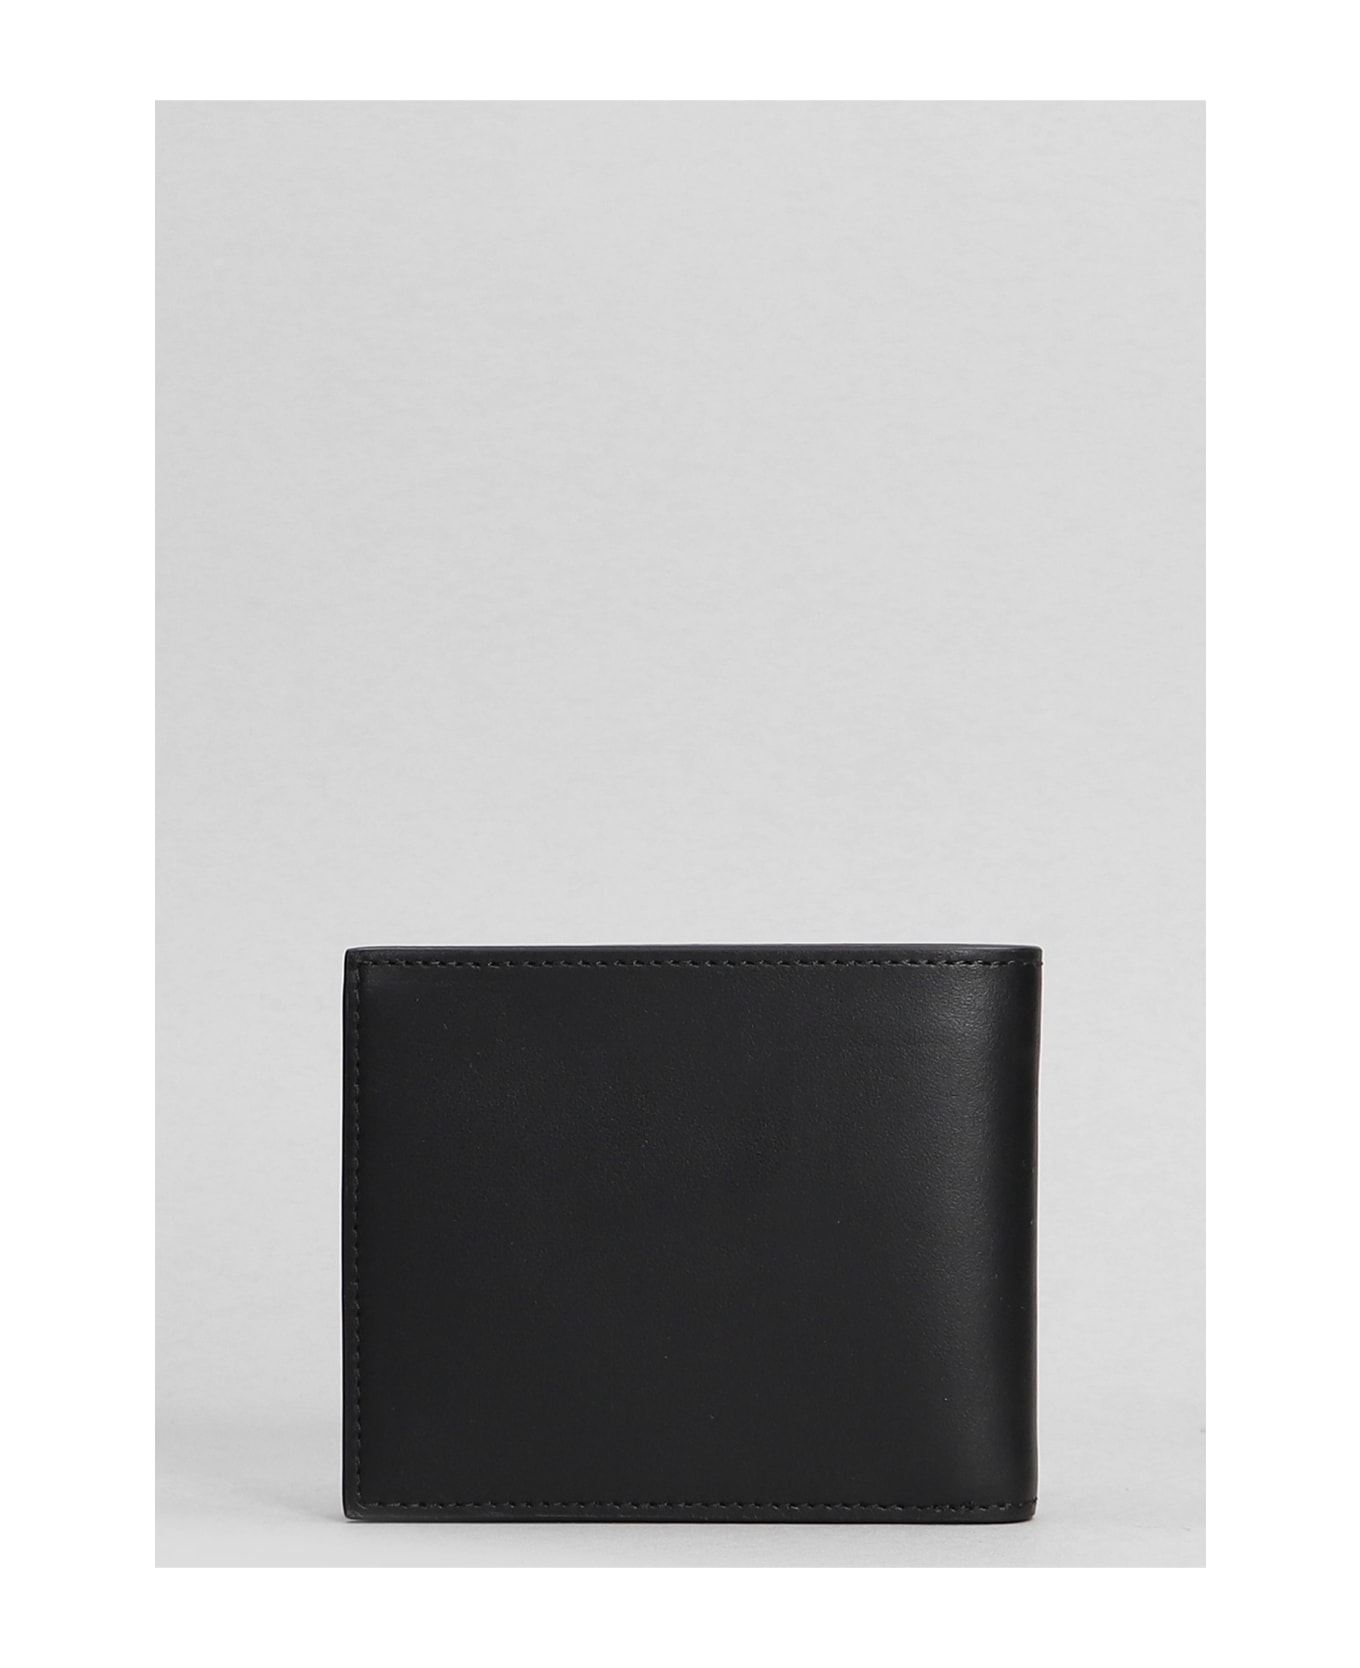 Off-White Wallet In Black Leather - black